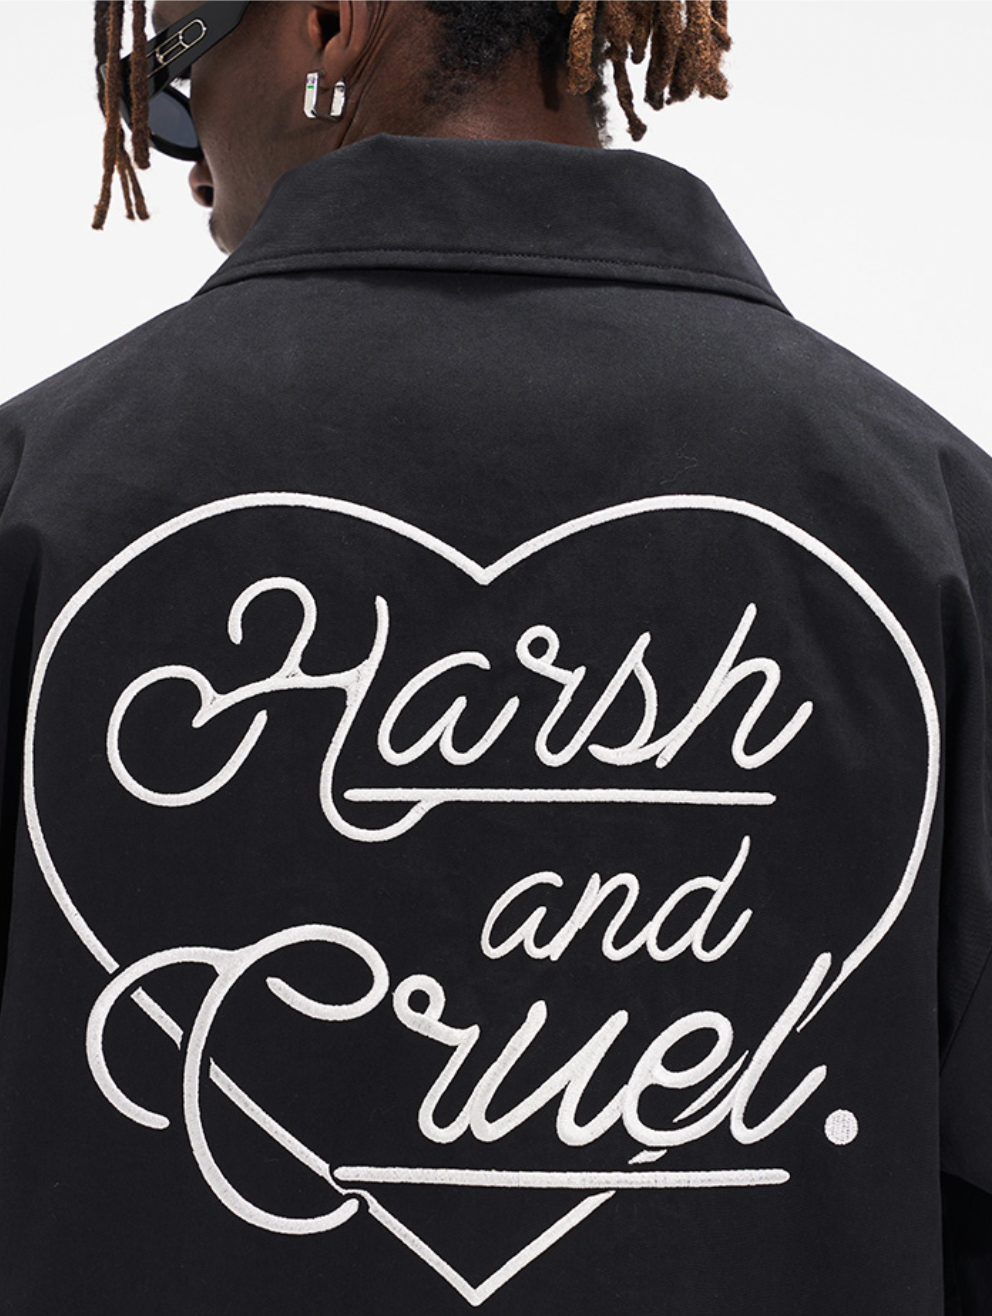 Harsh and Cruel Flower Body Lettering Love Embroidery Jacket